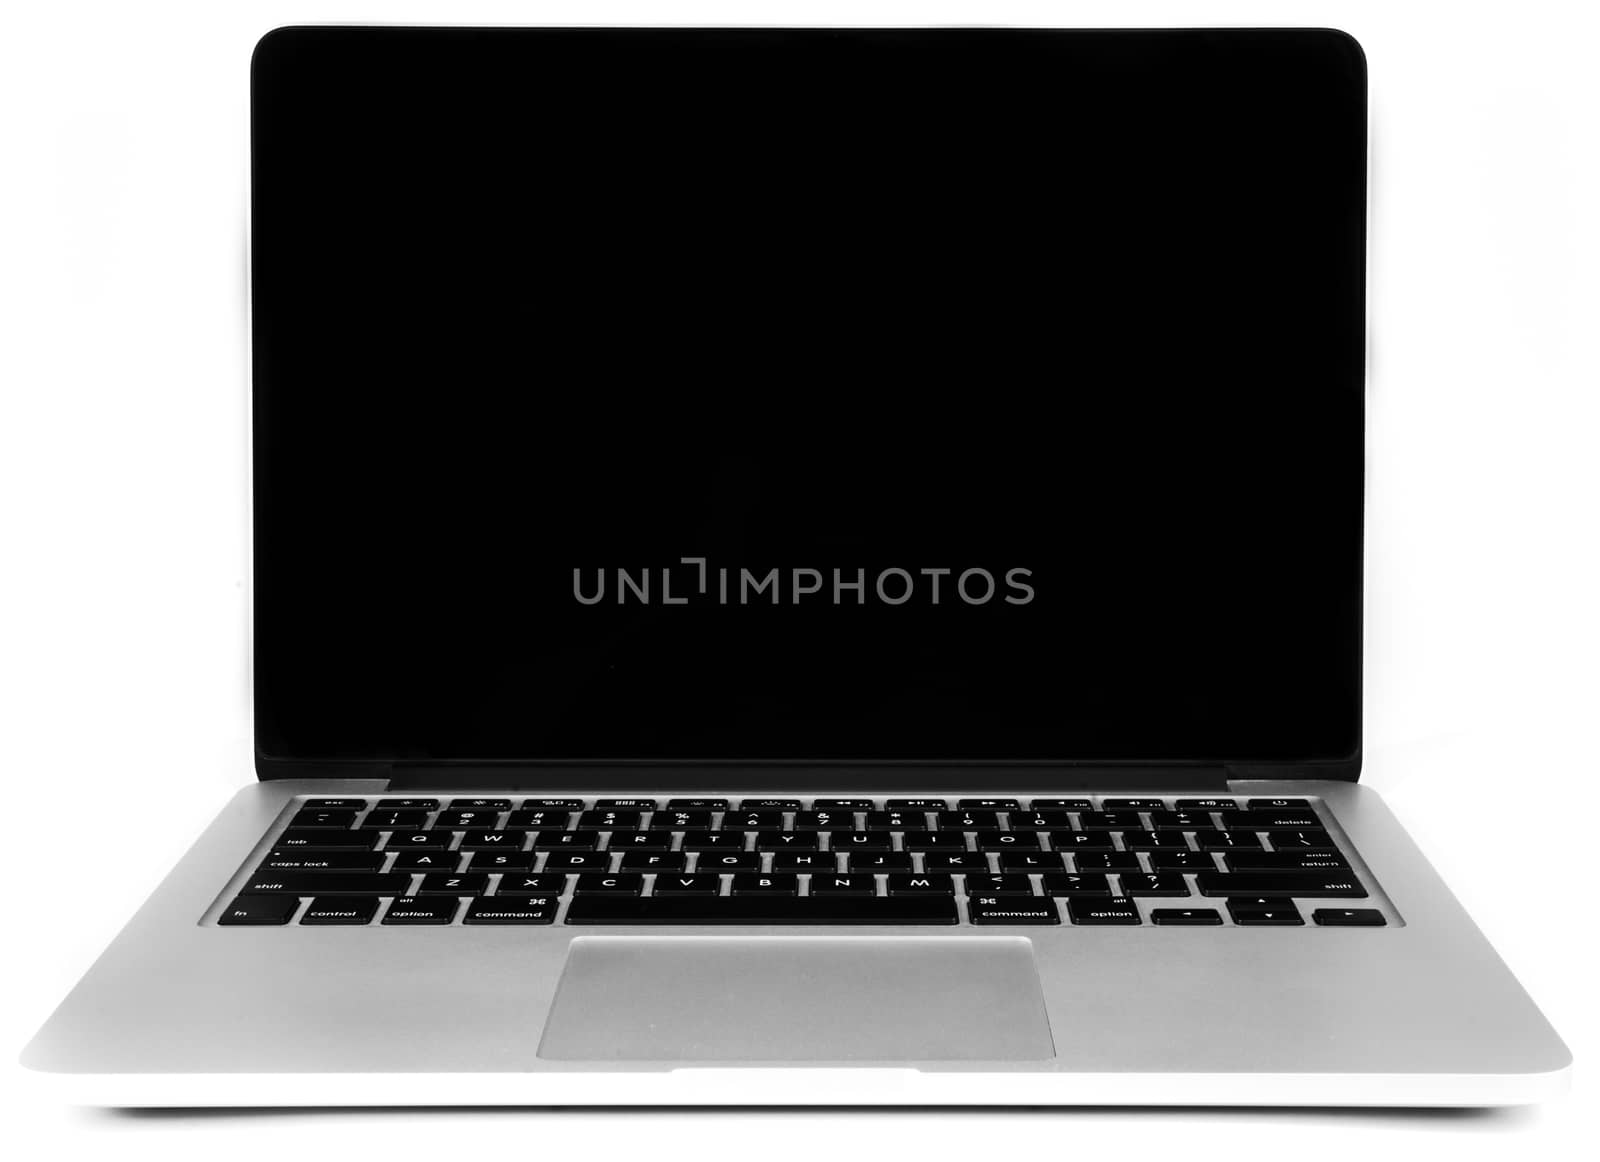 Gray portable computer with clipping path. Front view. Clipping path for the laptop and screen. Very large depth of field.